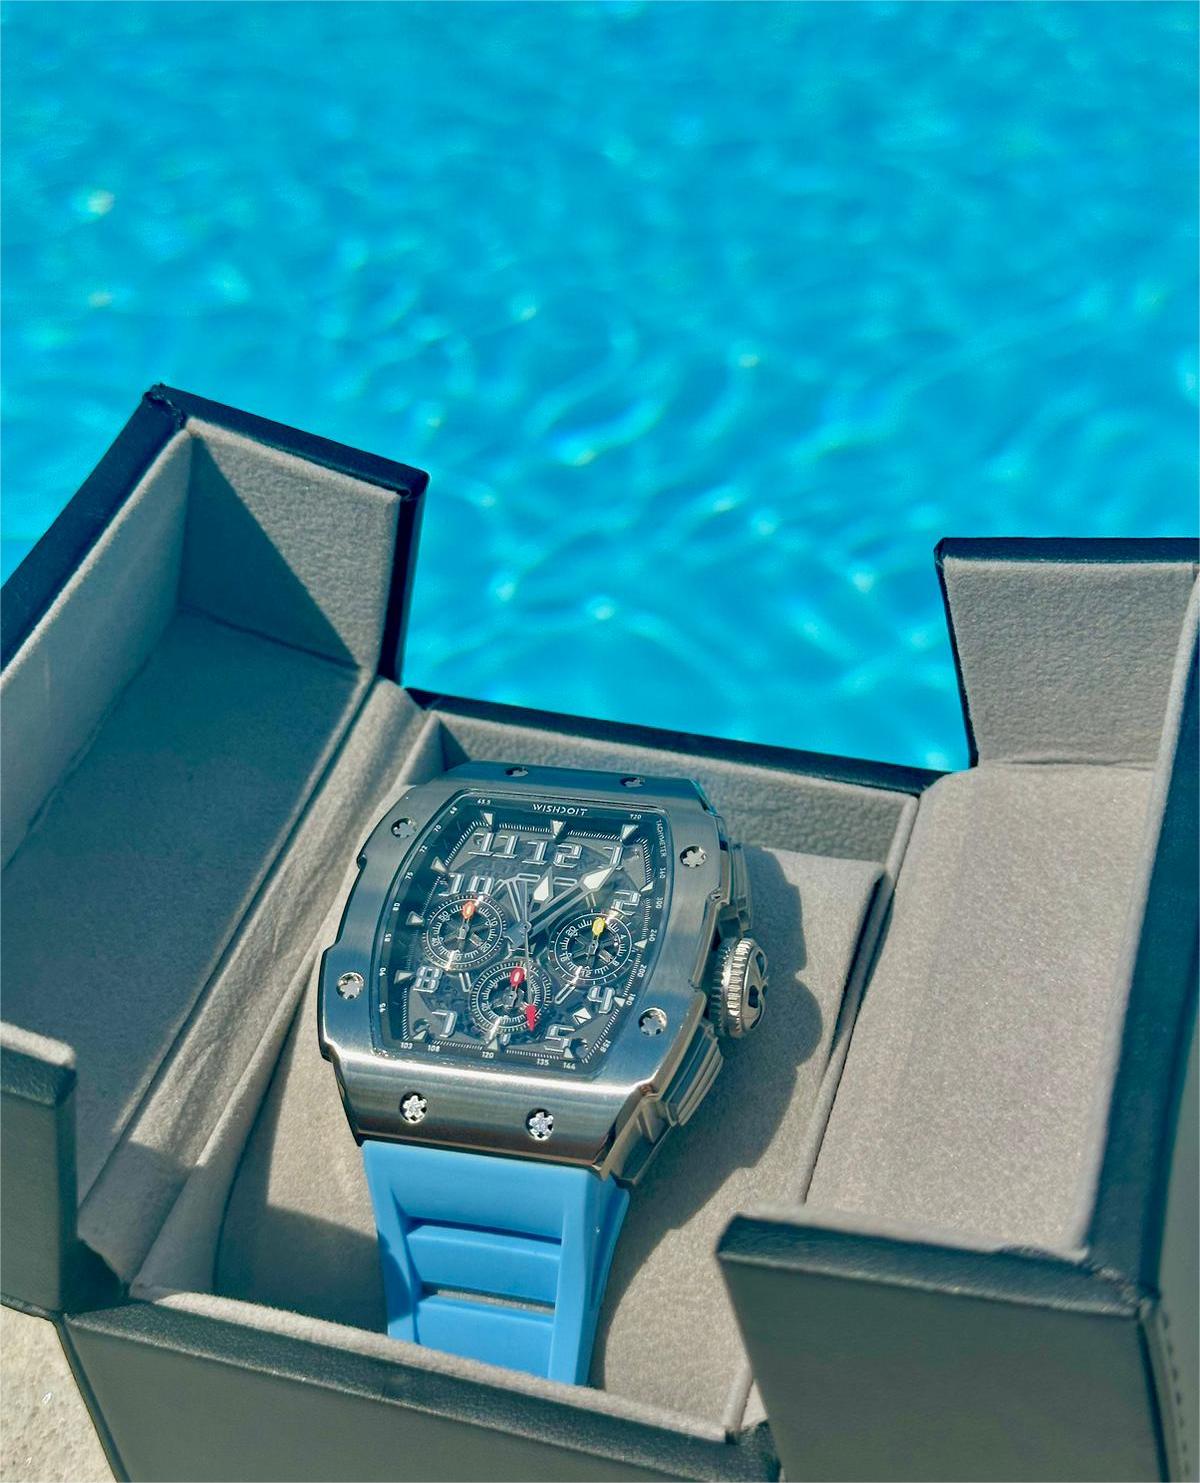 Buy Quartz Tonneau watches from Wishdoit Watches are for the modern gentleman who is bold, daring, and Chronograph sport watch features a 3 hand VD53 Seiko Quartz Movement and a black Fluorine Rubber watch band. 